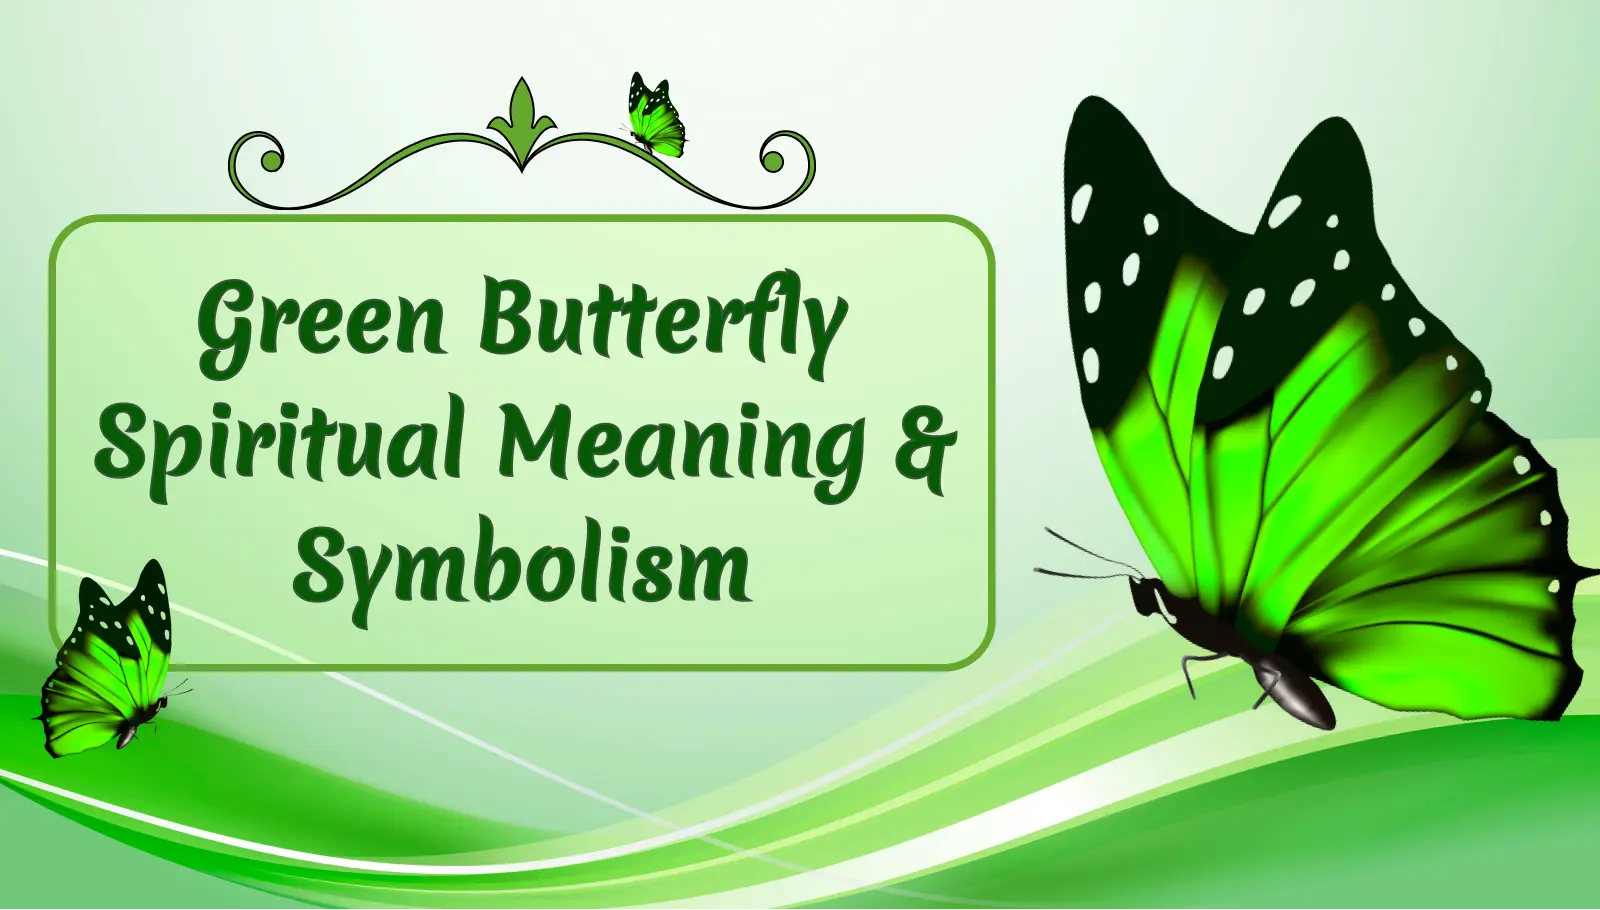 Green Butterfly Spiritual Meaning & Symbolism